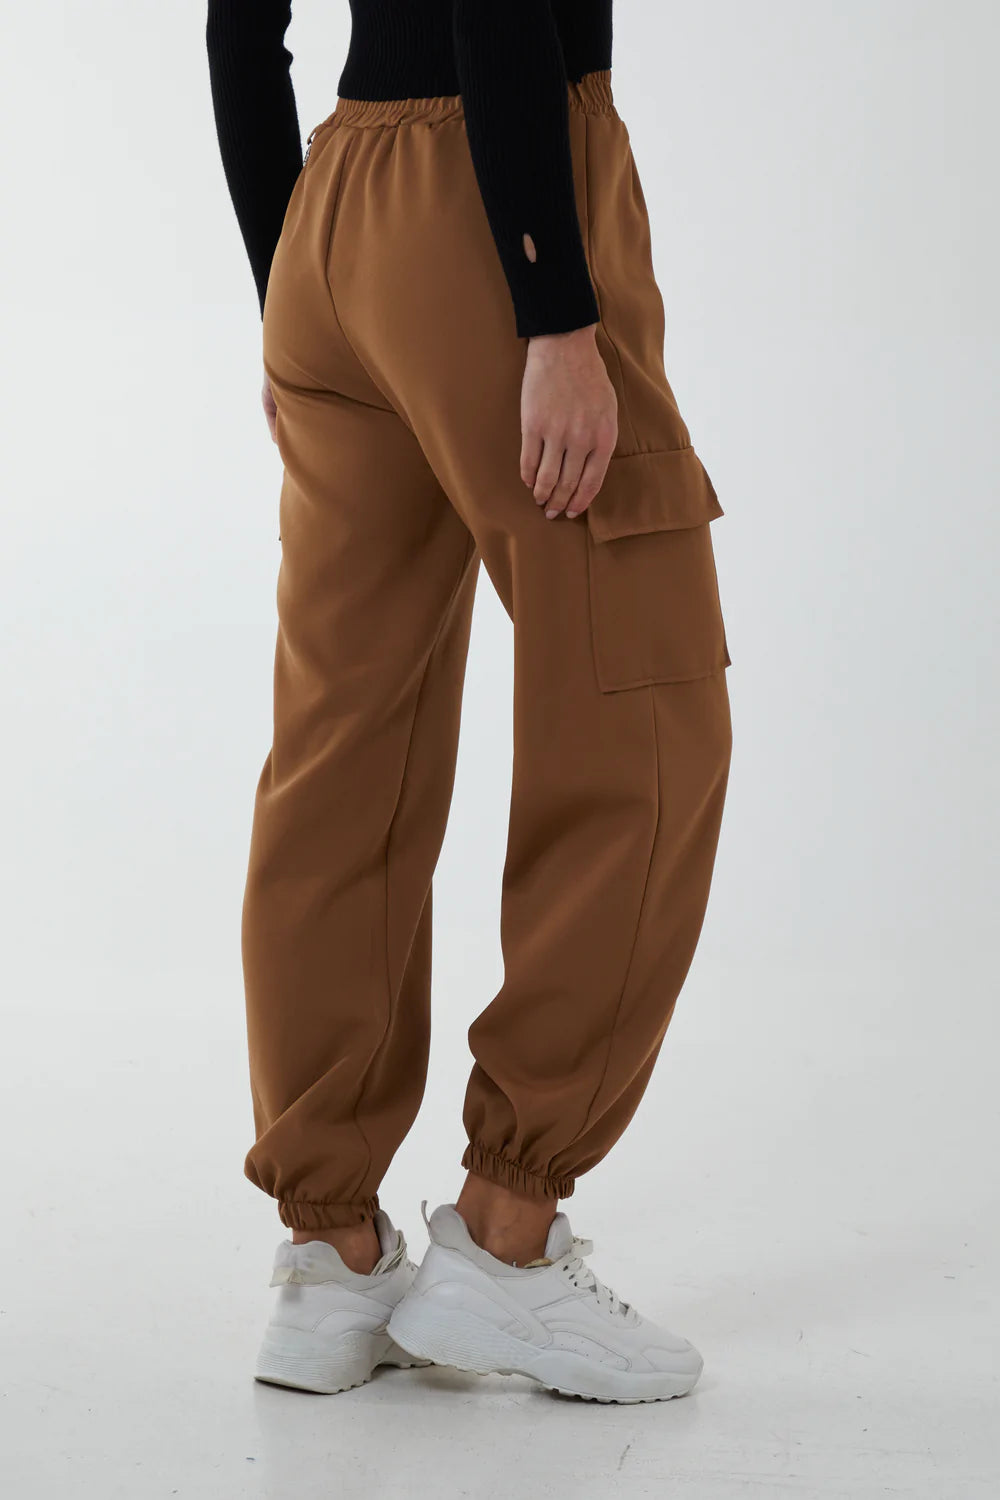 Camel coloured cargo pants with side pockets and removable chain detailing